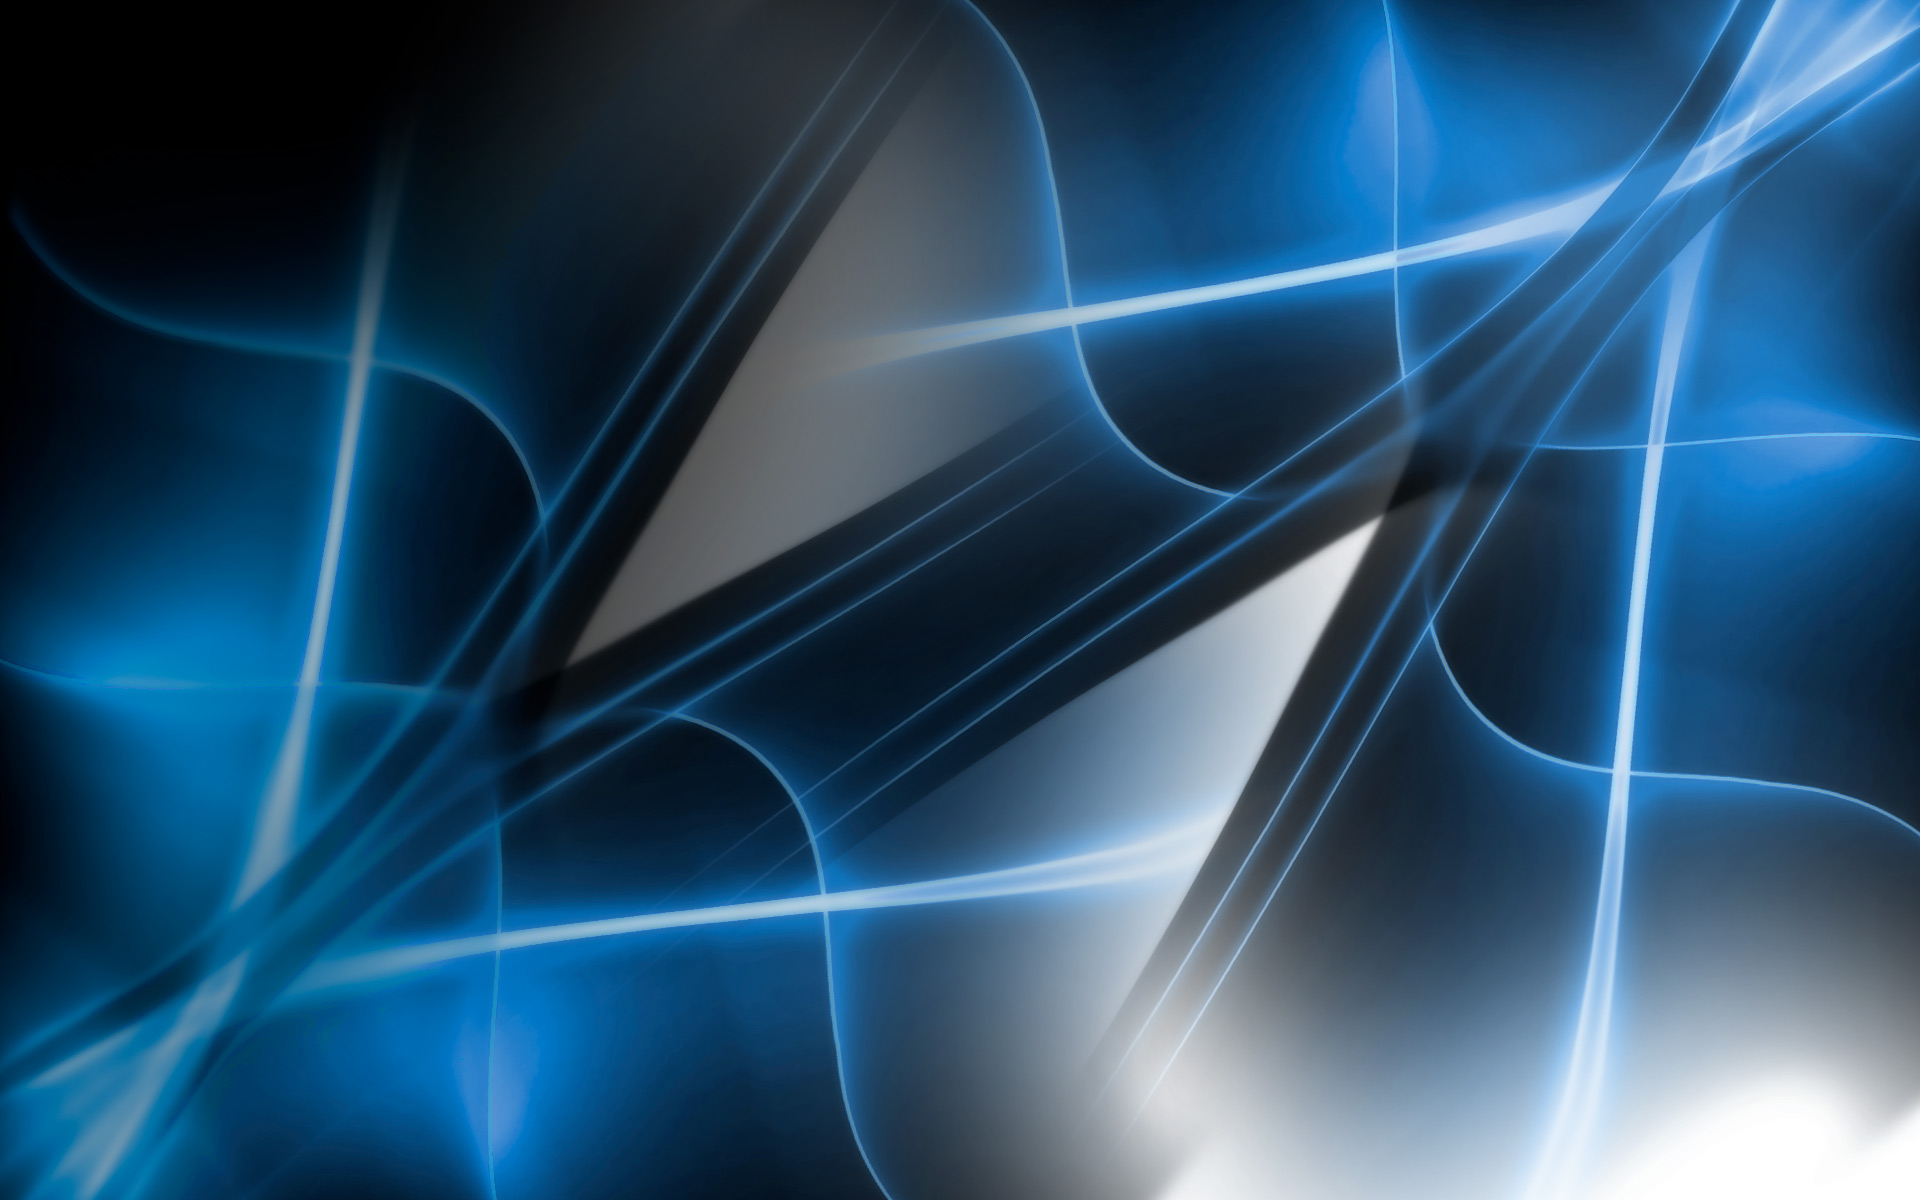 Blue Abstract Full Hd Wallpaper Gallery Yopriceville High Quality Images And Transparent Png Free Clipart